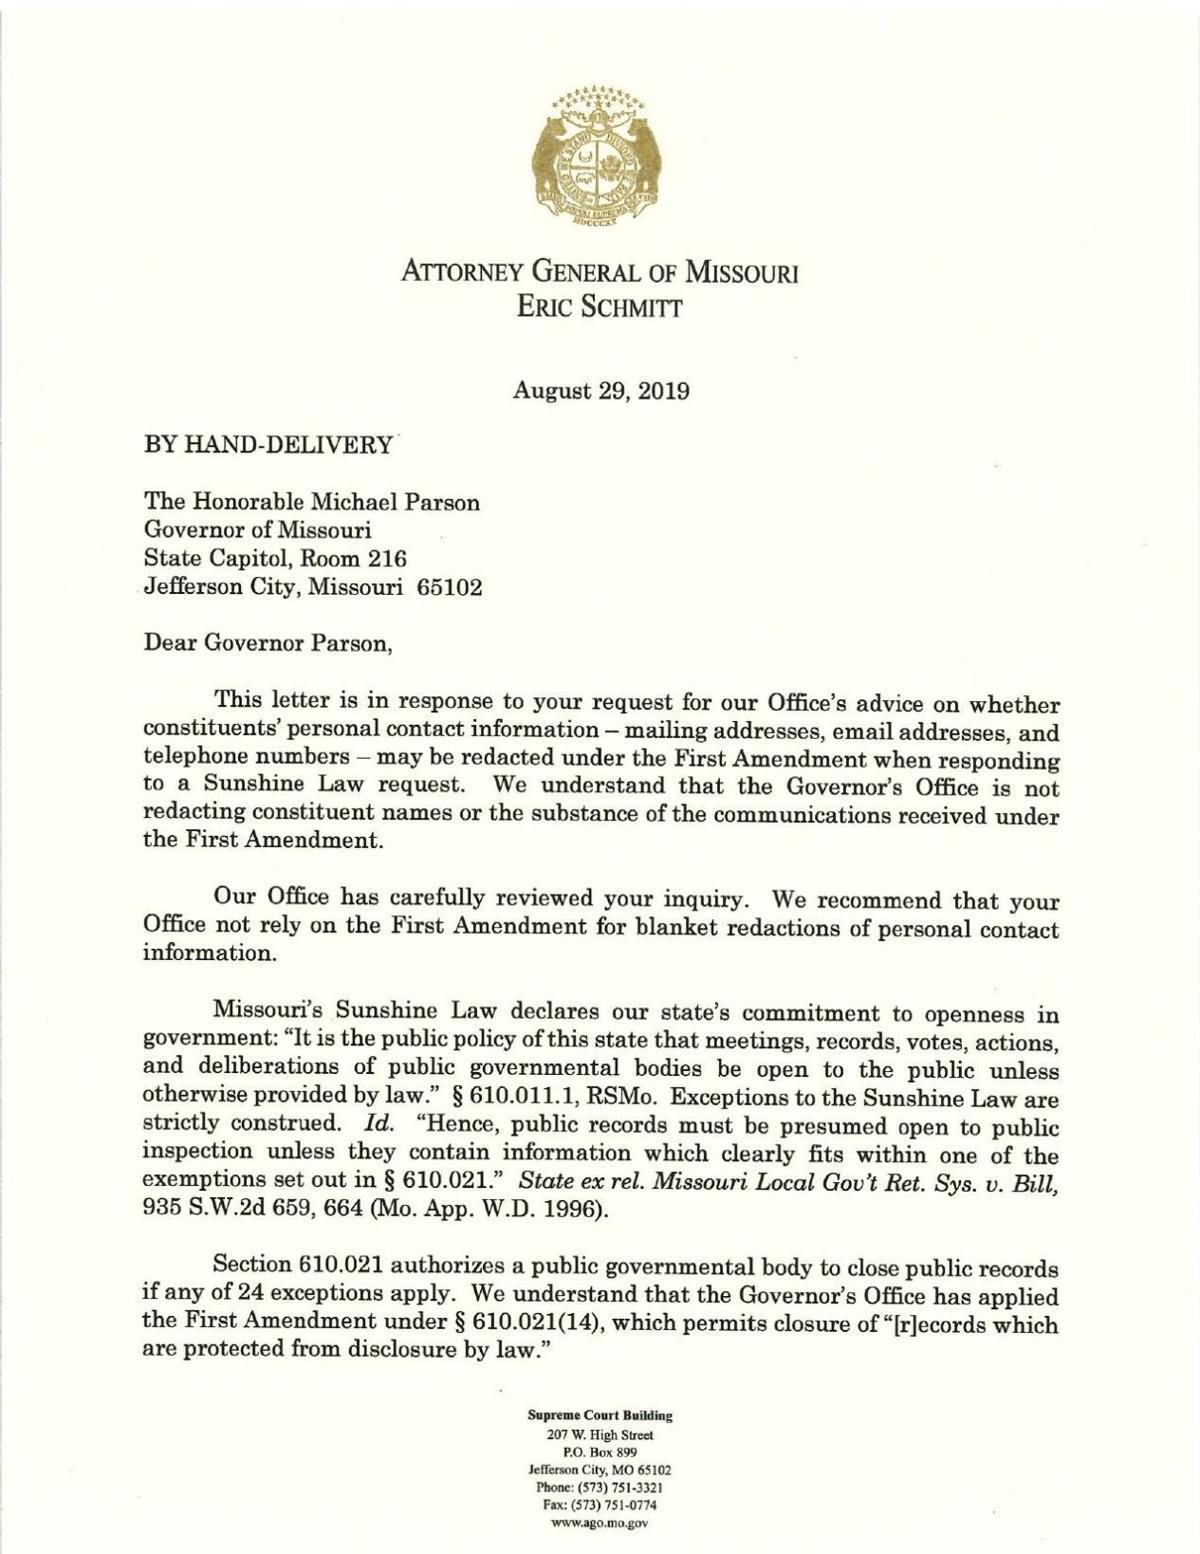 Attorney general's office letter